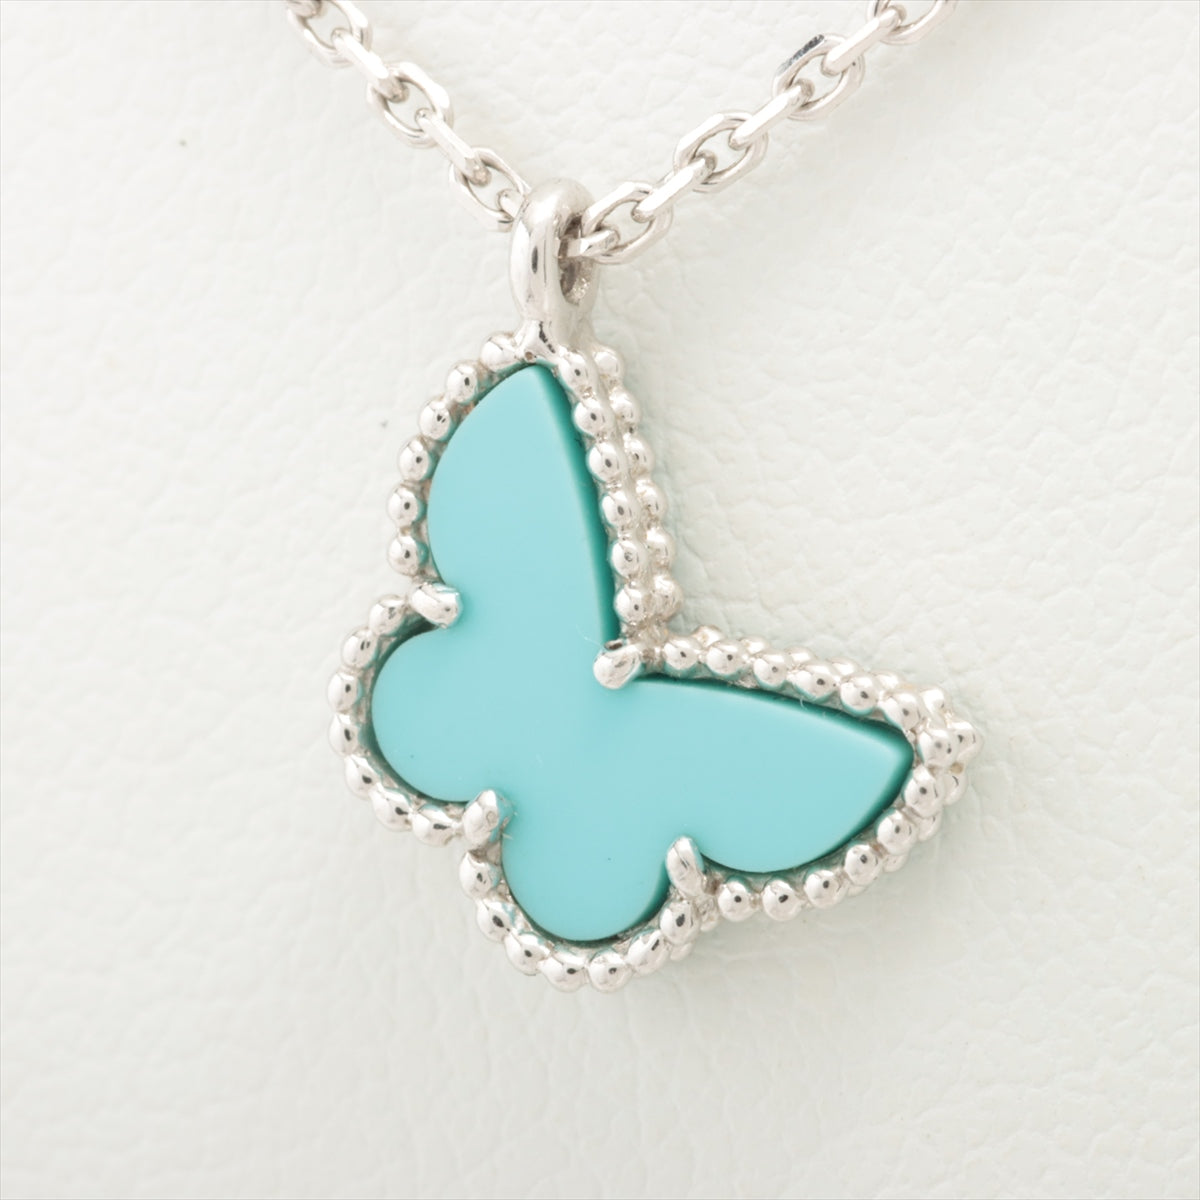 Van Cleef & Arpels Sweet Alhambra Papillon Turquoise Necklace 750(WG) 2.9g